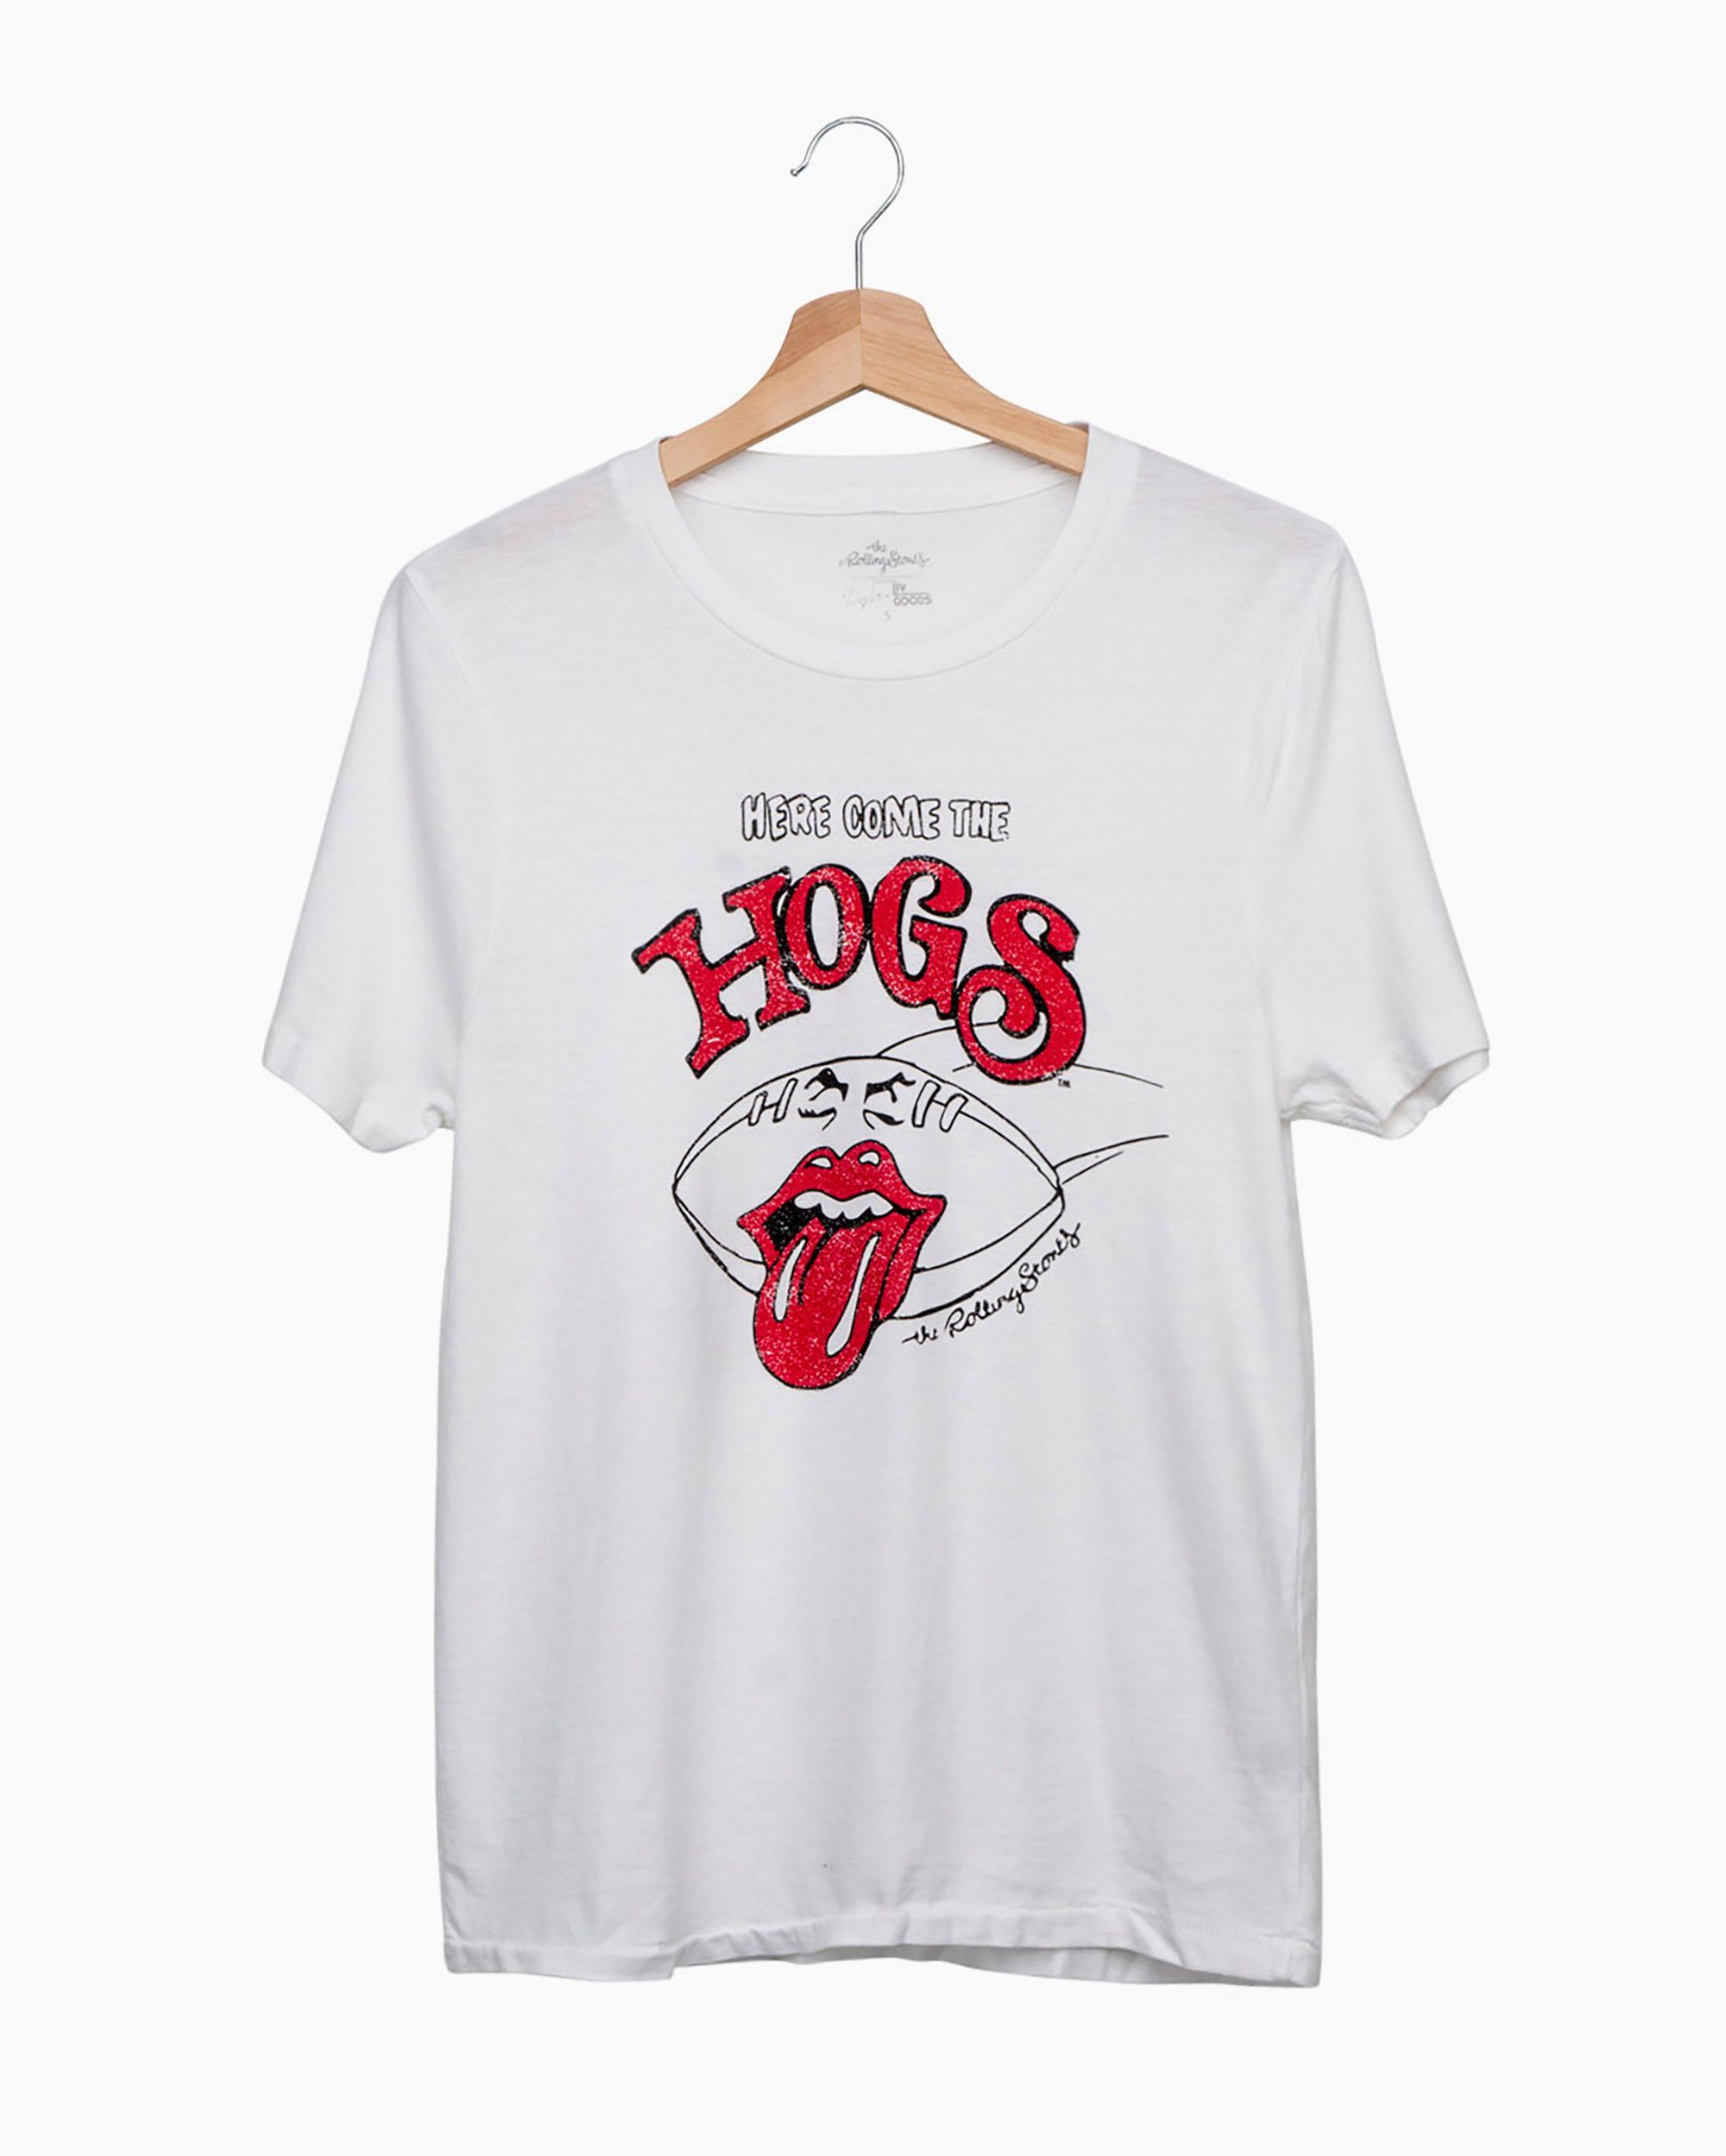 Rolling Stones Here Come the Hogs White Tee - shoplivylu